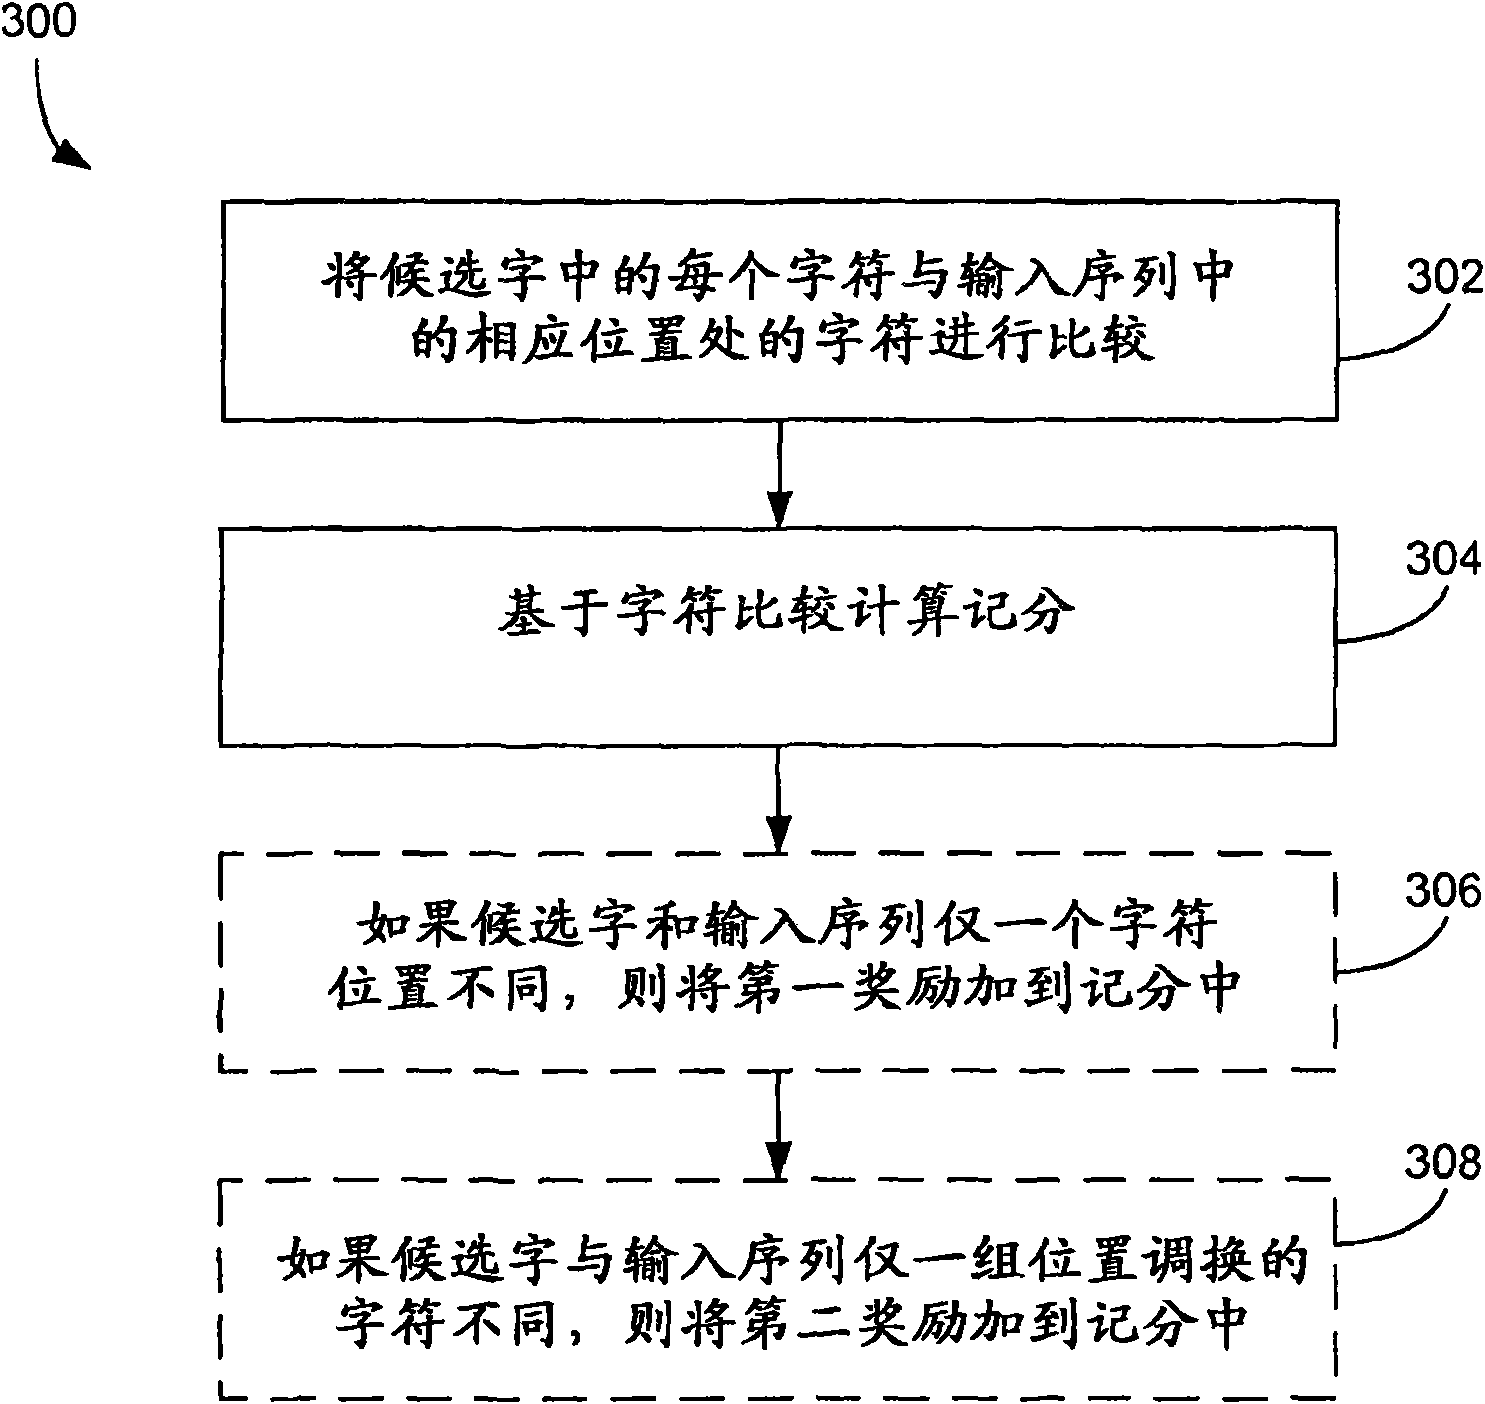 Method and system for providing word recommendations for text input